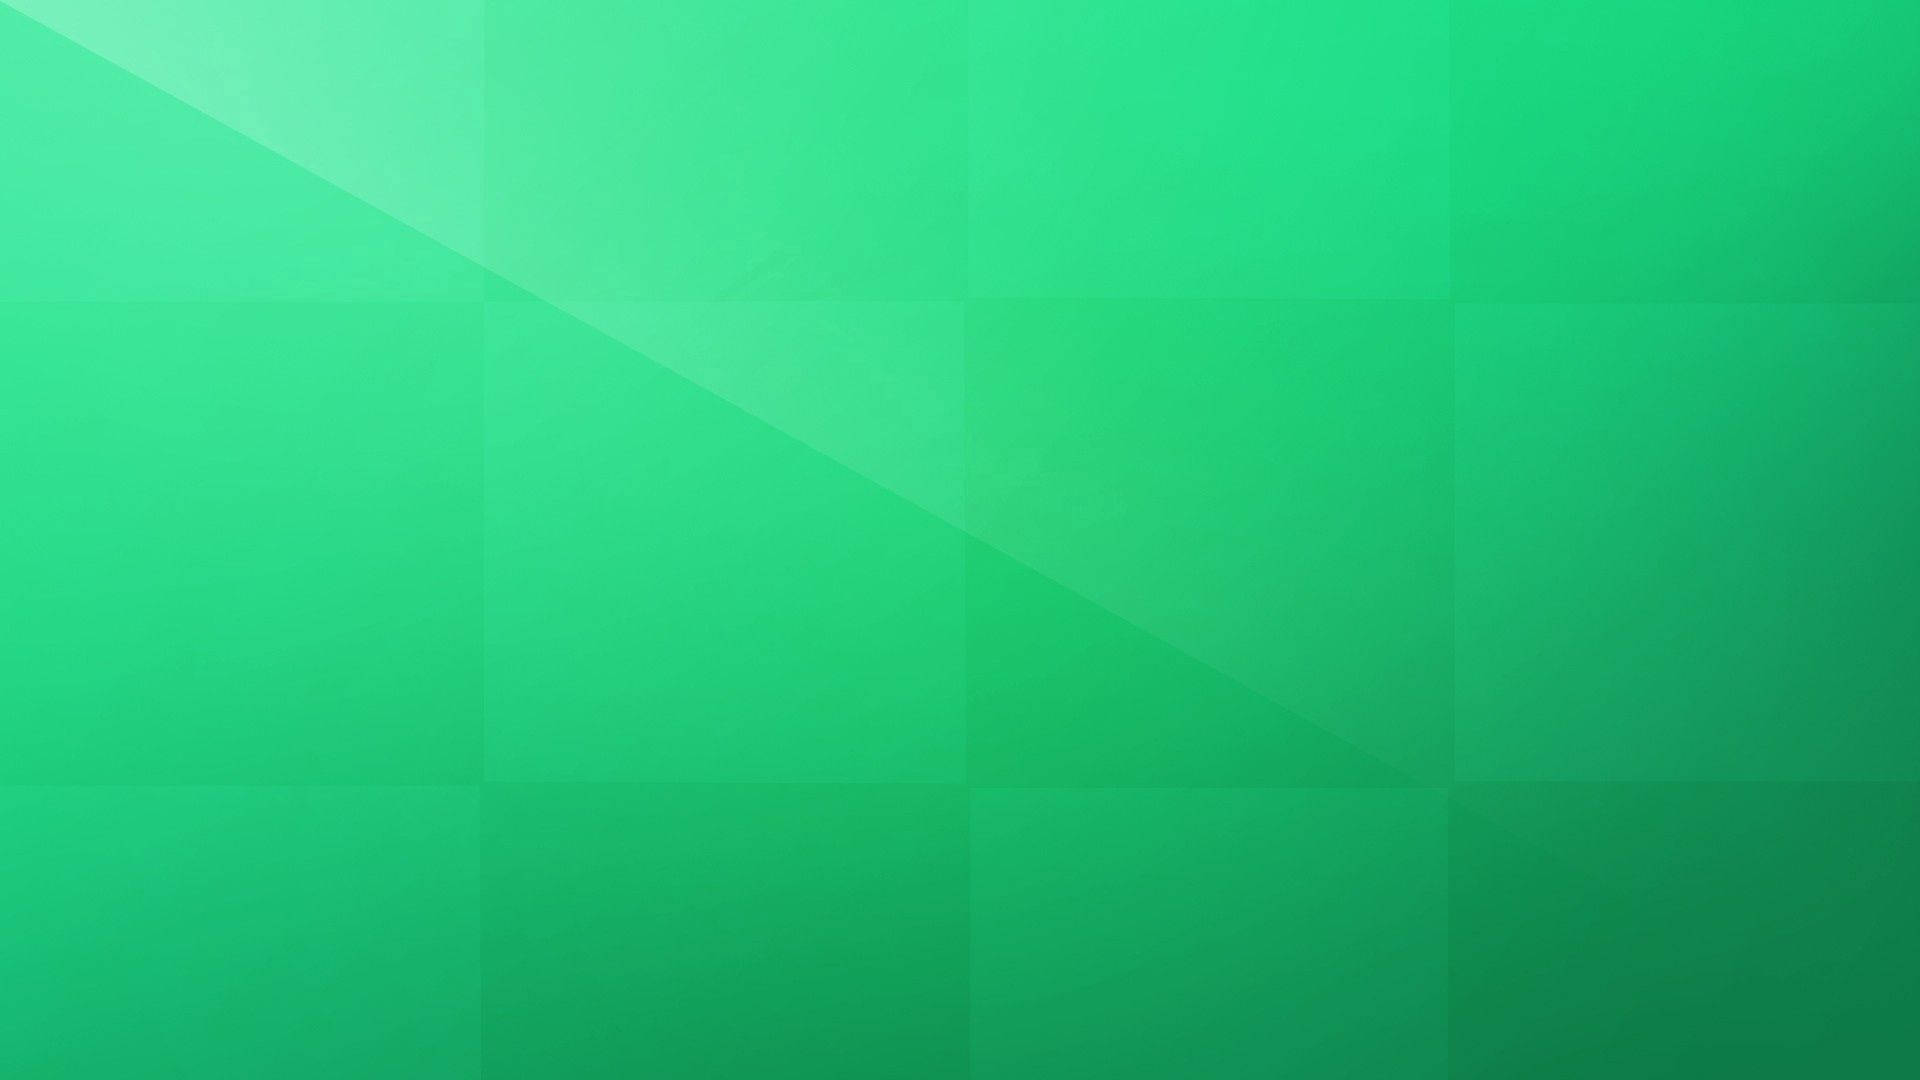 Pixelated Green Solid Color Background